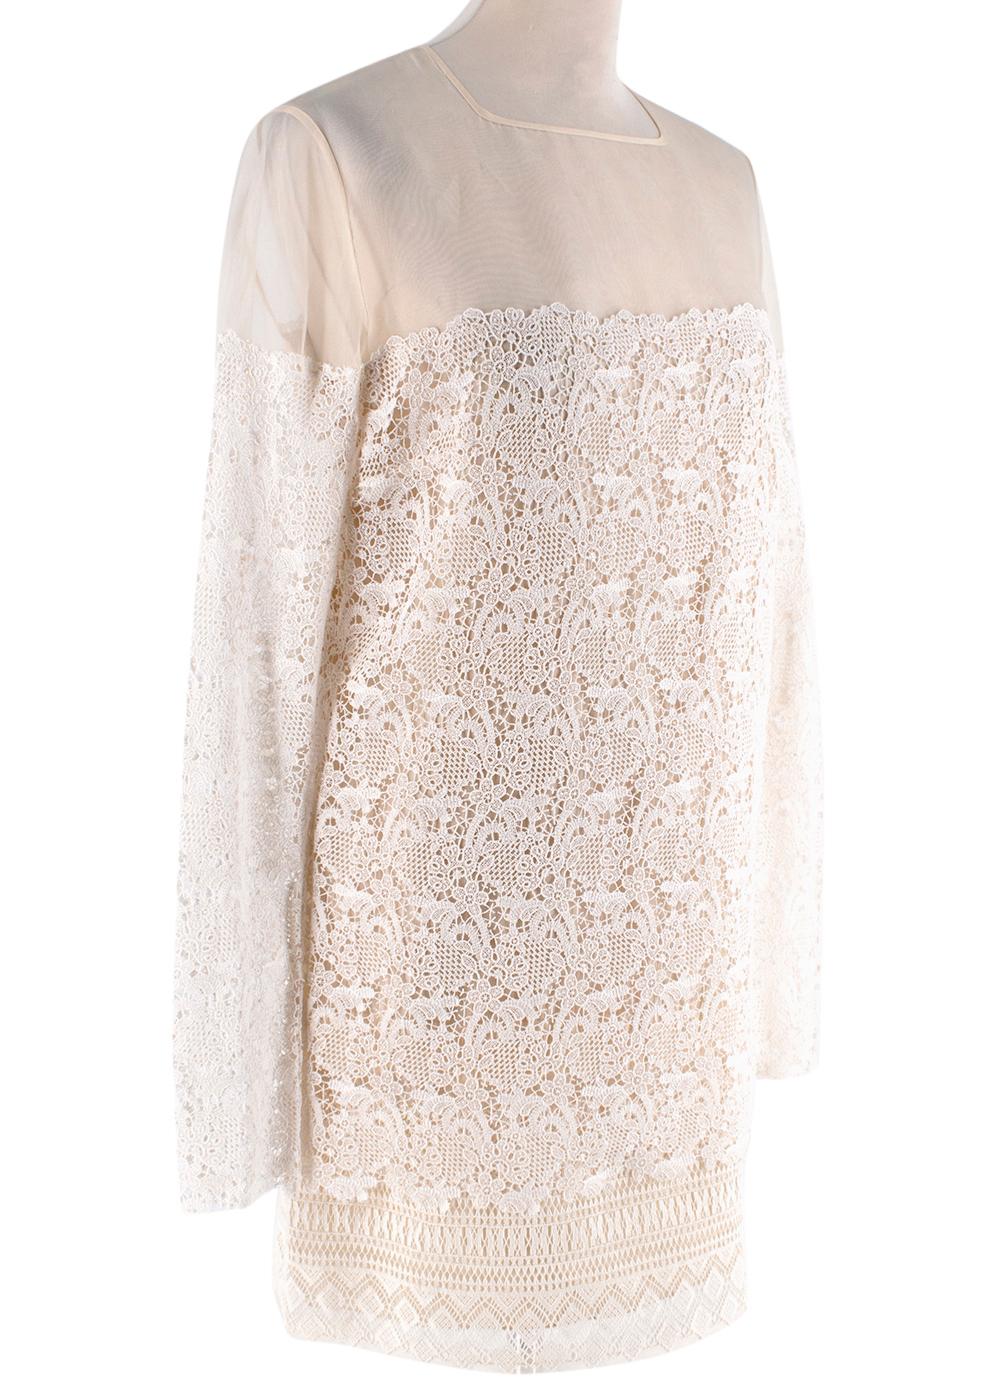 Ermanno Scervino Ivory Lace Dress 

- Sheer top 
- Long sleeved 
- Layered skirt
- Sheer underskirt 
- Petticoat
- Mid length 

Materials:
Exterior fabric:
- 100% Silk
Insert:
- 90% Cotton
- 10% Polyester
Lining:
- 100% Silk

Dry clean only

Made in